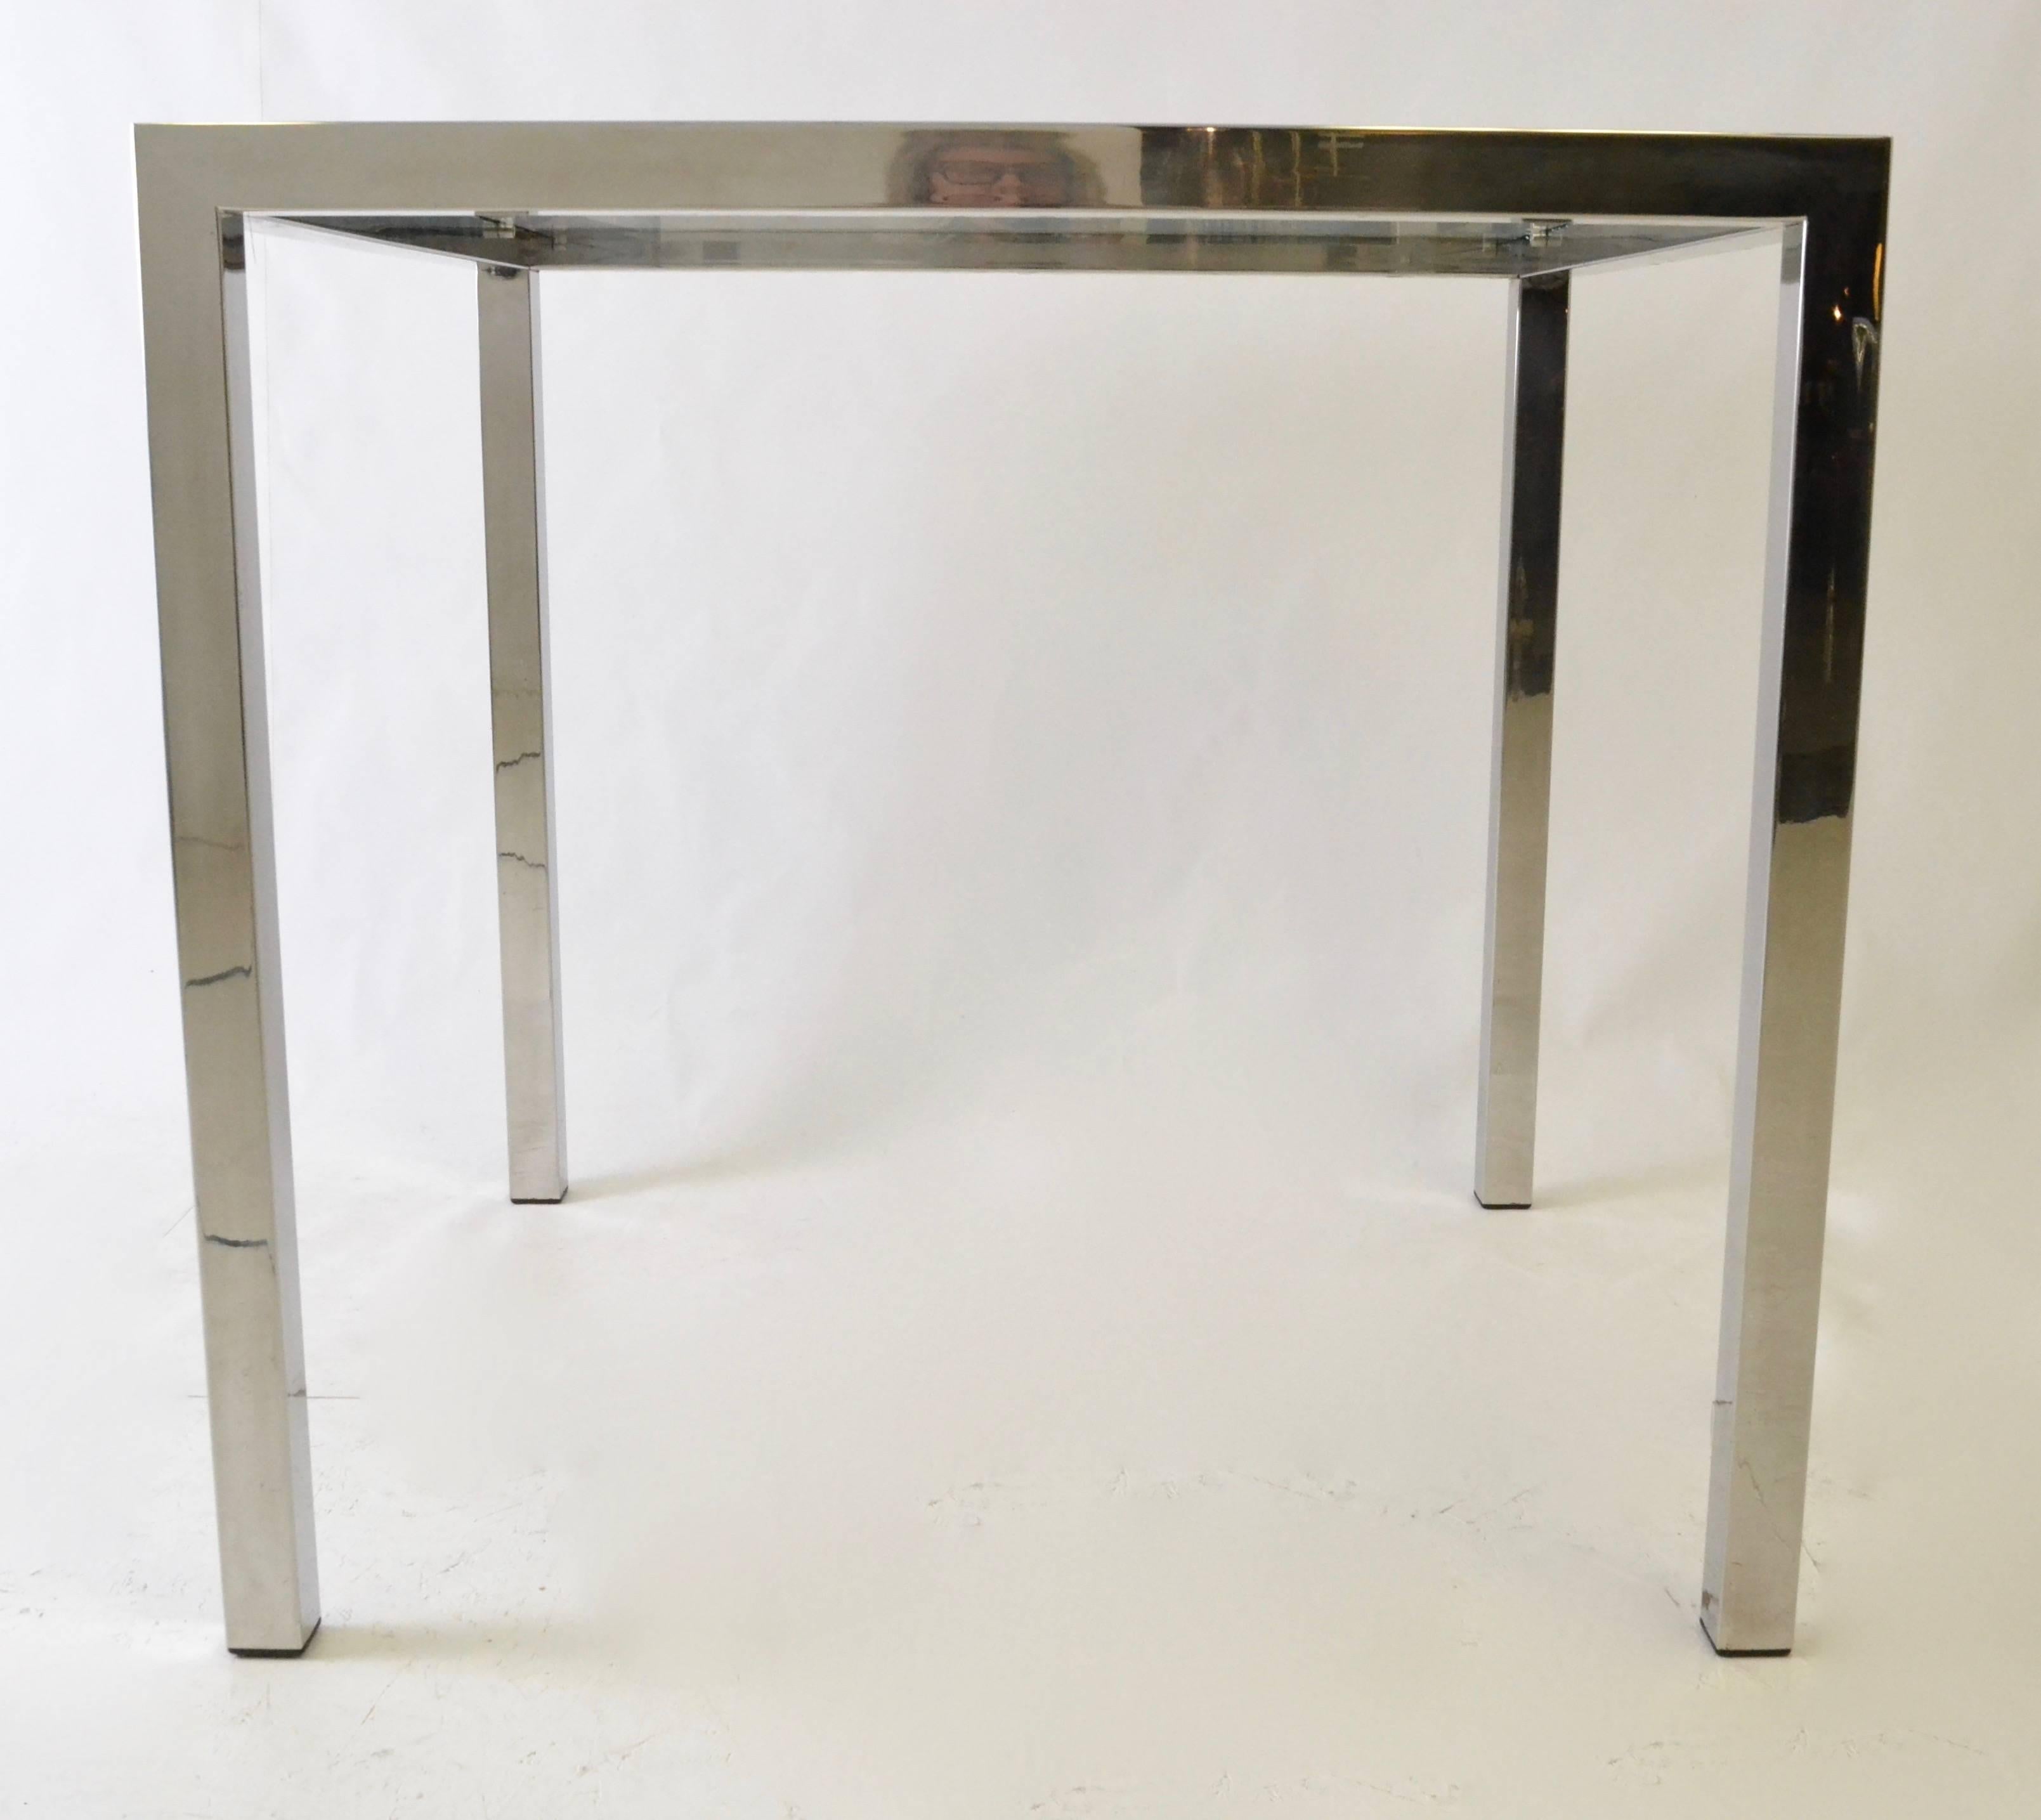 A sleek and simple square table. Great game table. Glass is new and in excellent condition. The chrome has been newly polished and is very good on top and the upper part of legs. Minor scratches low on legs (vacuum bites).